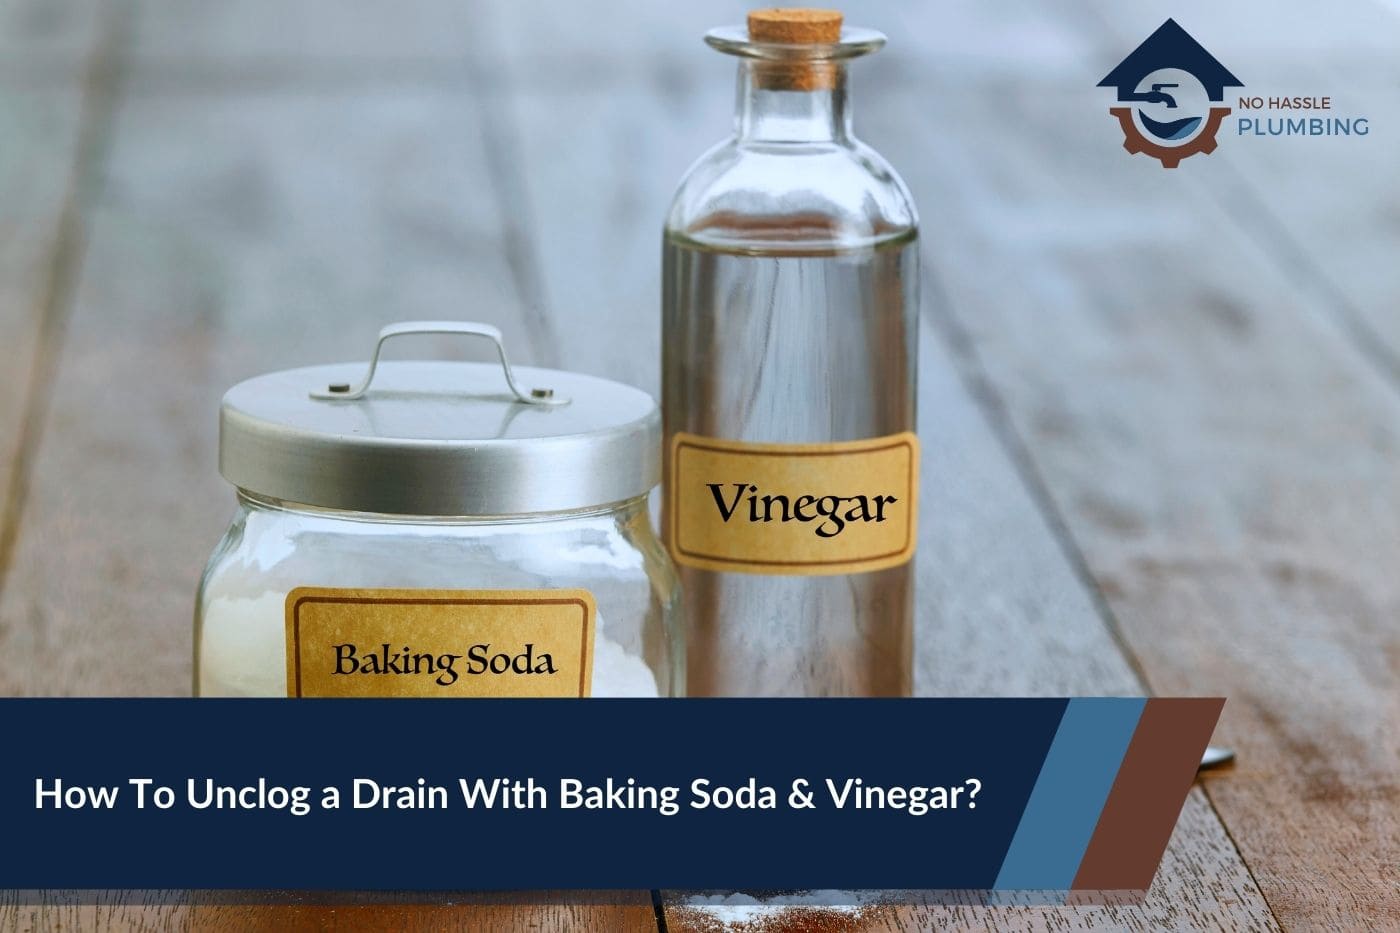 How To Unclog a Drain With Baking Soda & Vinegar - No Hassle Plumbing.com featured image showing a bottle of vinegar and a jar of baking soda